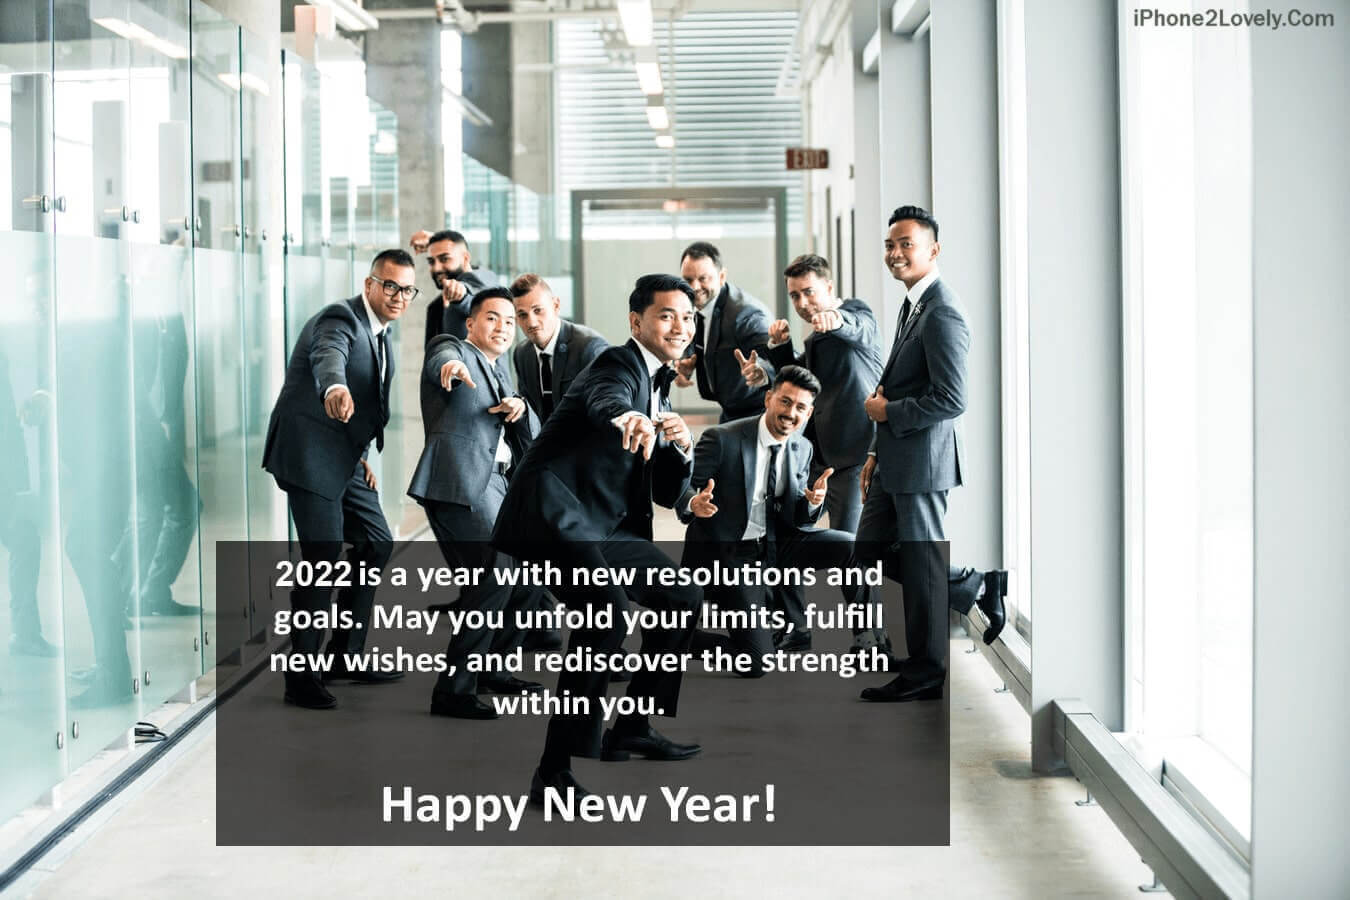 Best New Year 2022 Wishes For Collegues Employees From Boss